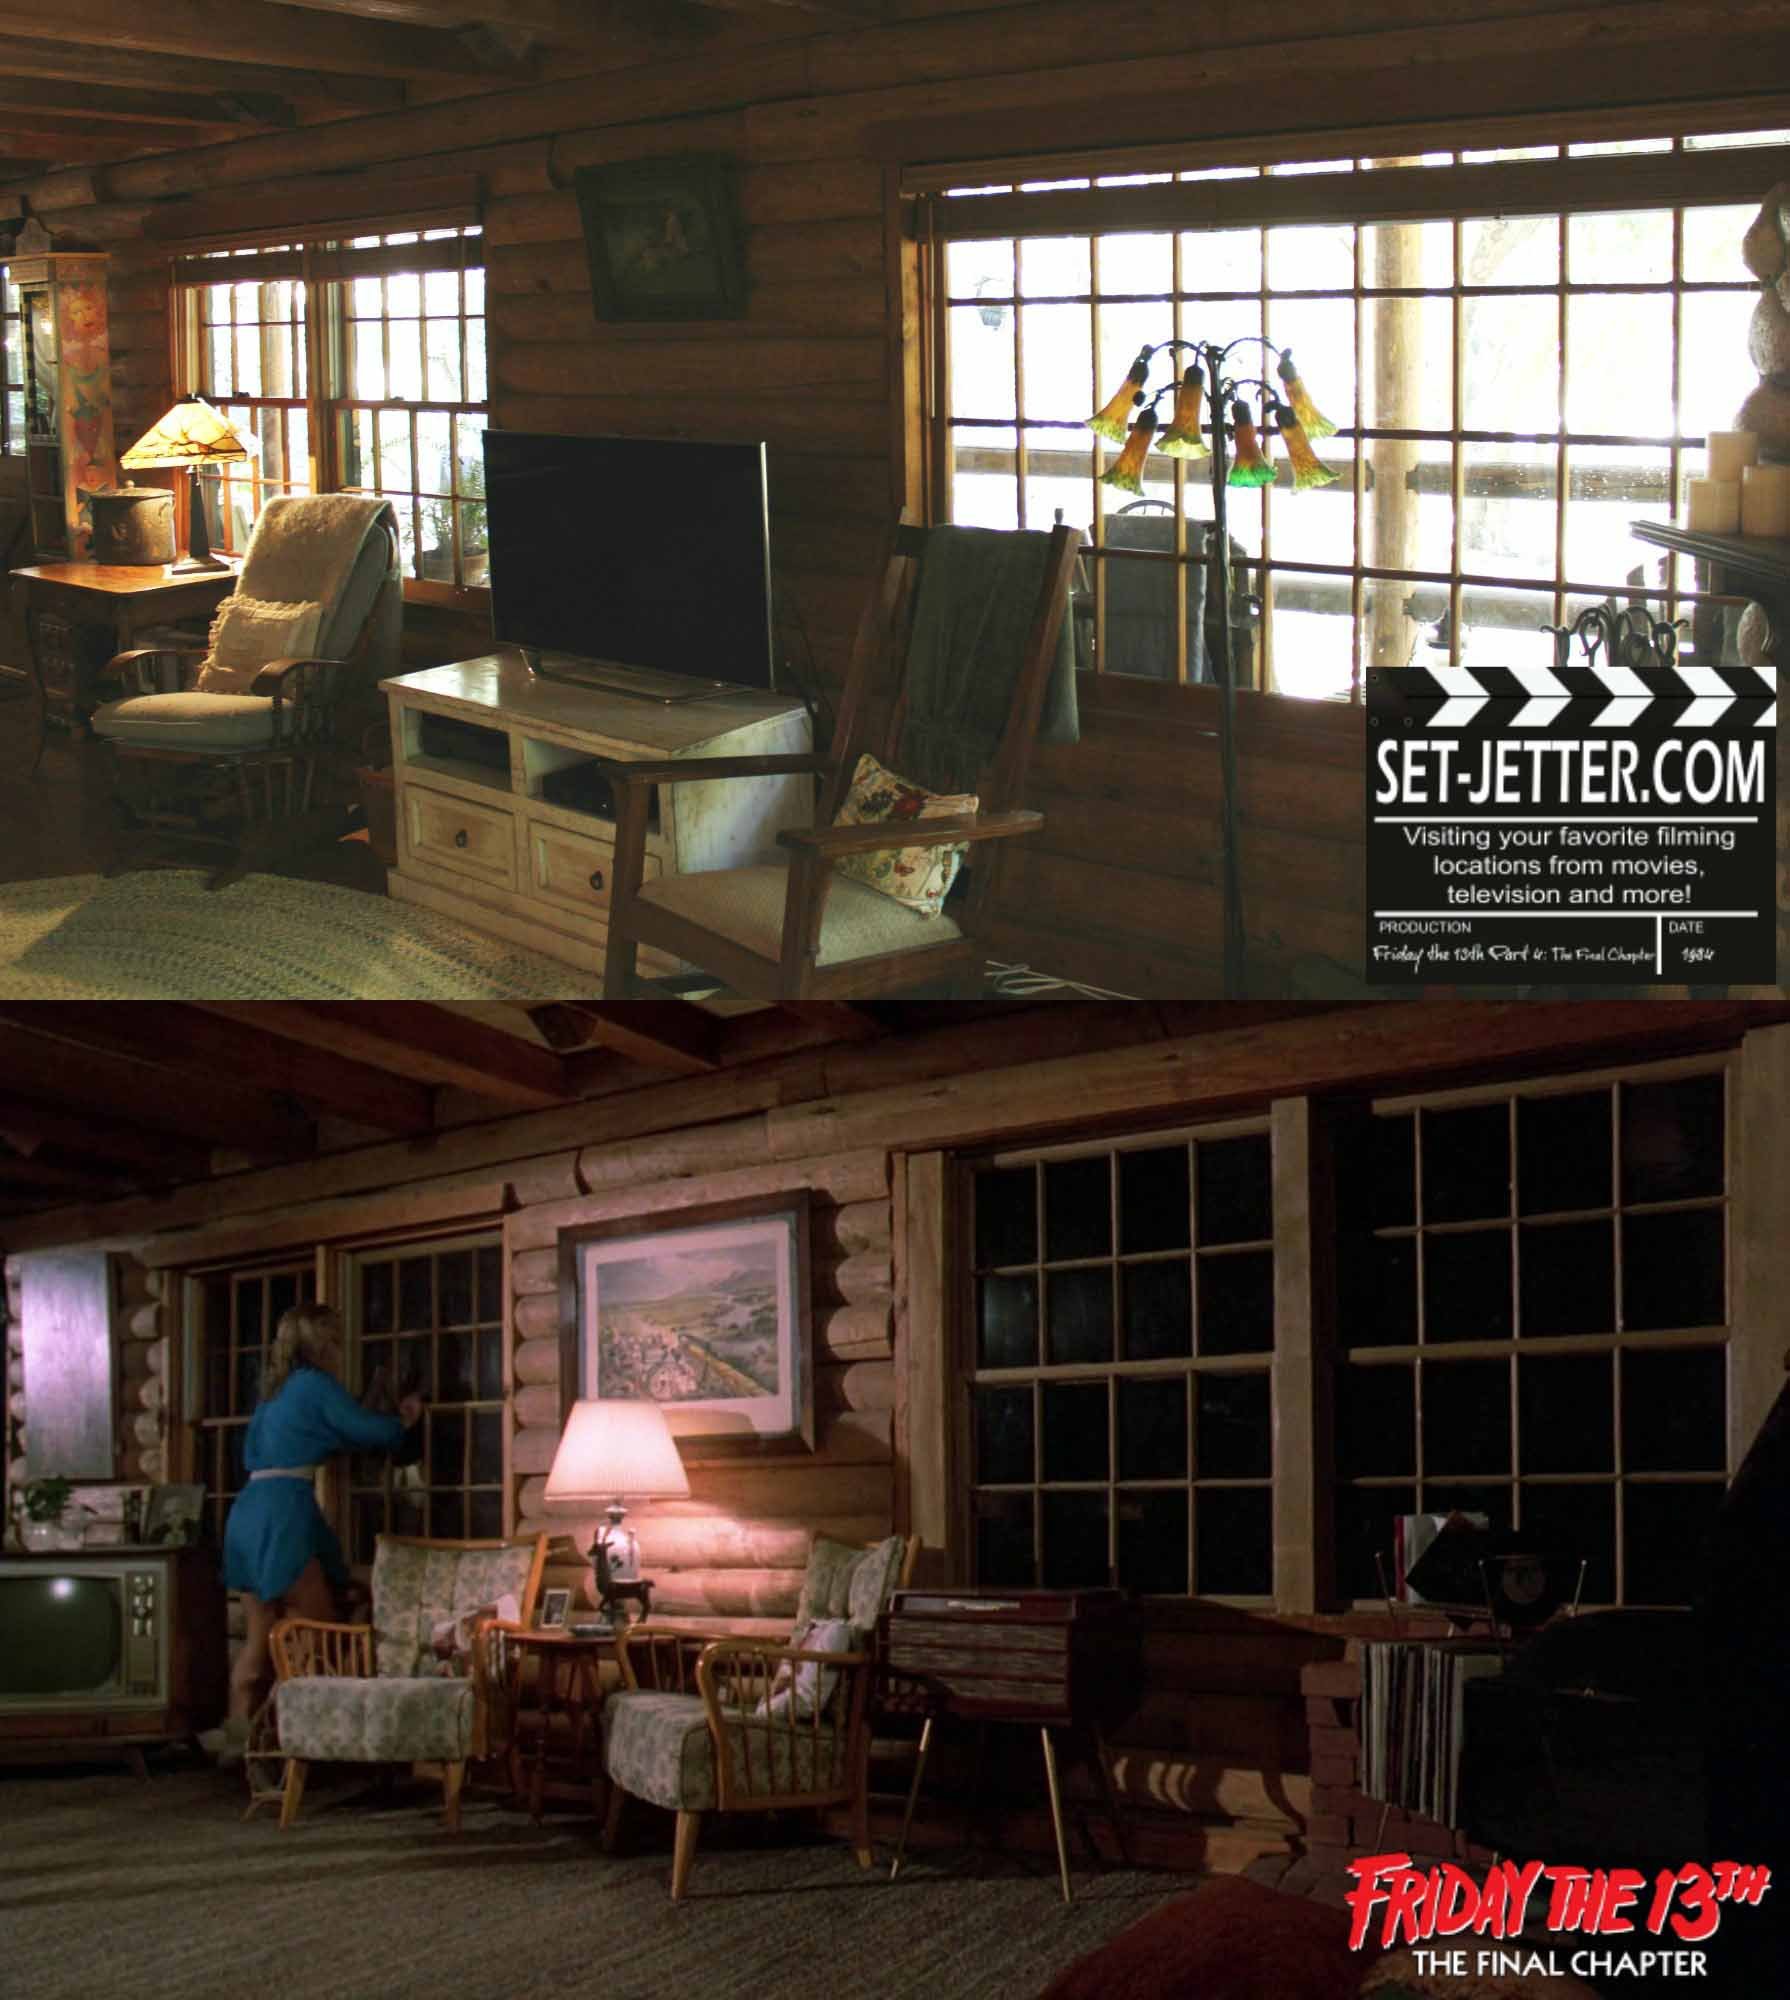 Friday the 13th The Final Chapter comparison 201.jpg